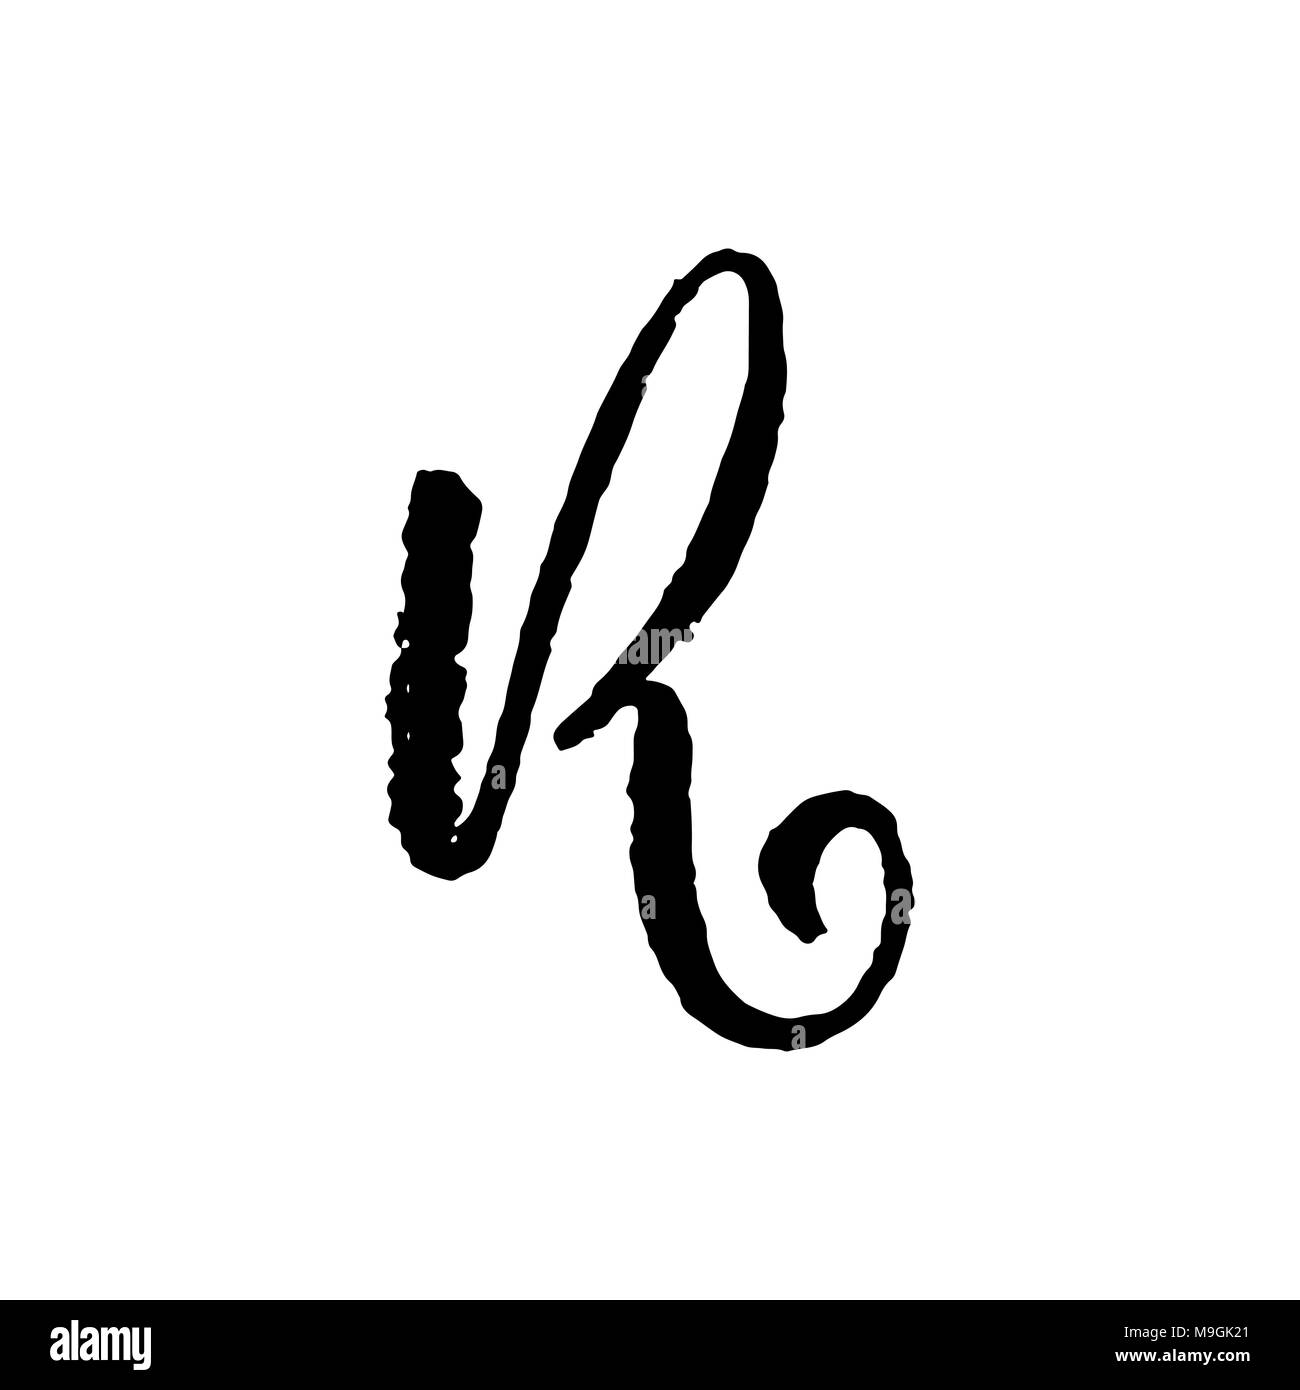 Letter R. Handwritten by dry brush. Rough strokes textured font ...